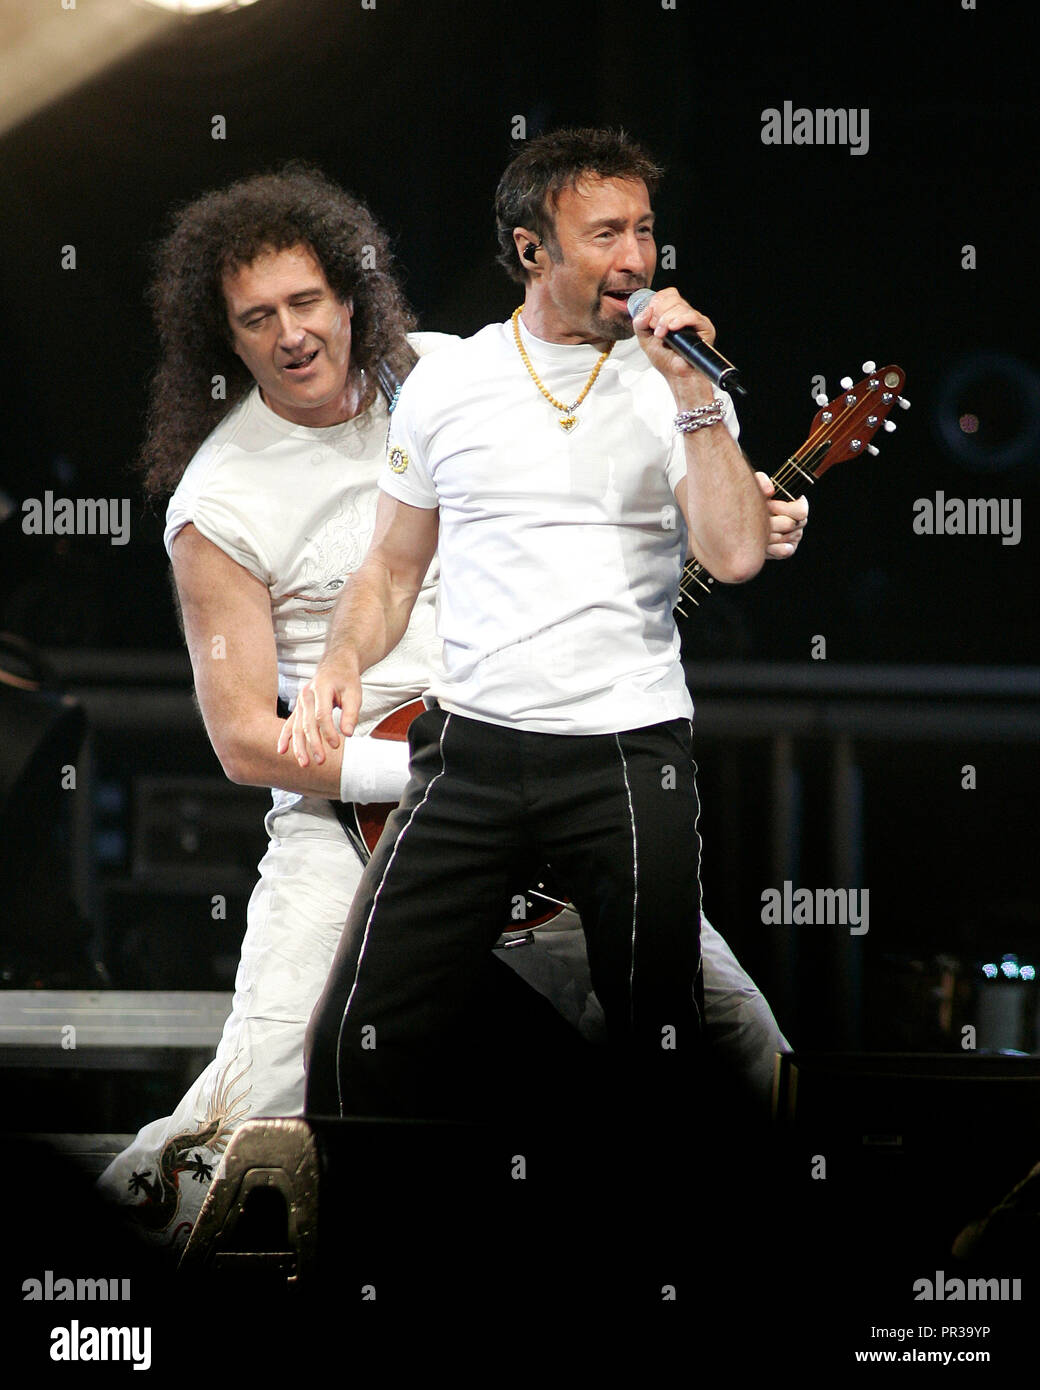 Brian May(L) and Paul Rodgers with Queen perform in concert at the American Airlines Arena in Miami, Florida on March 3, 2006. Stock Photo